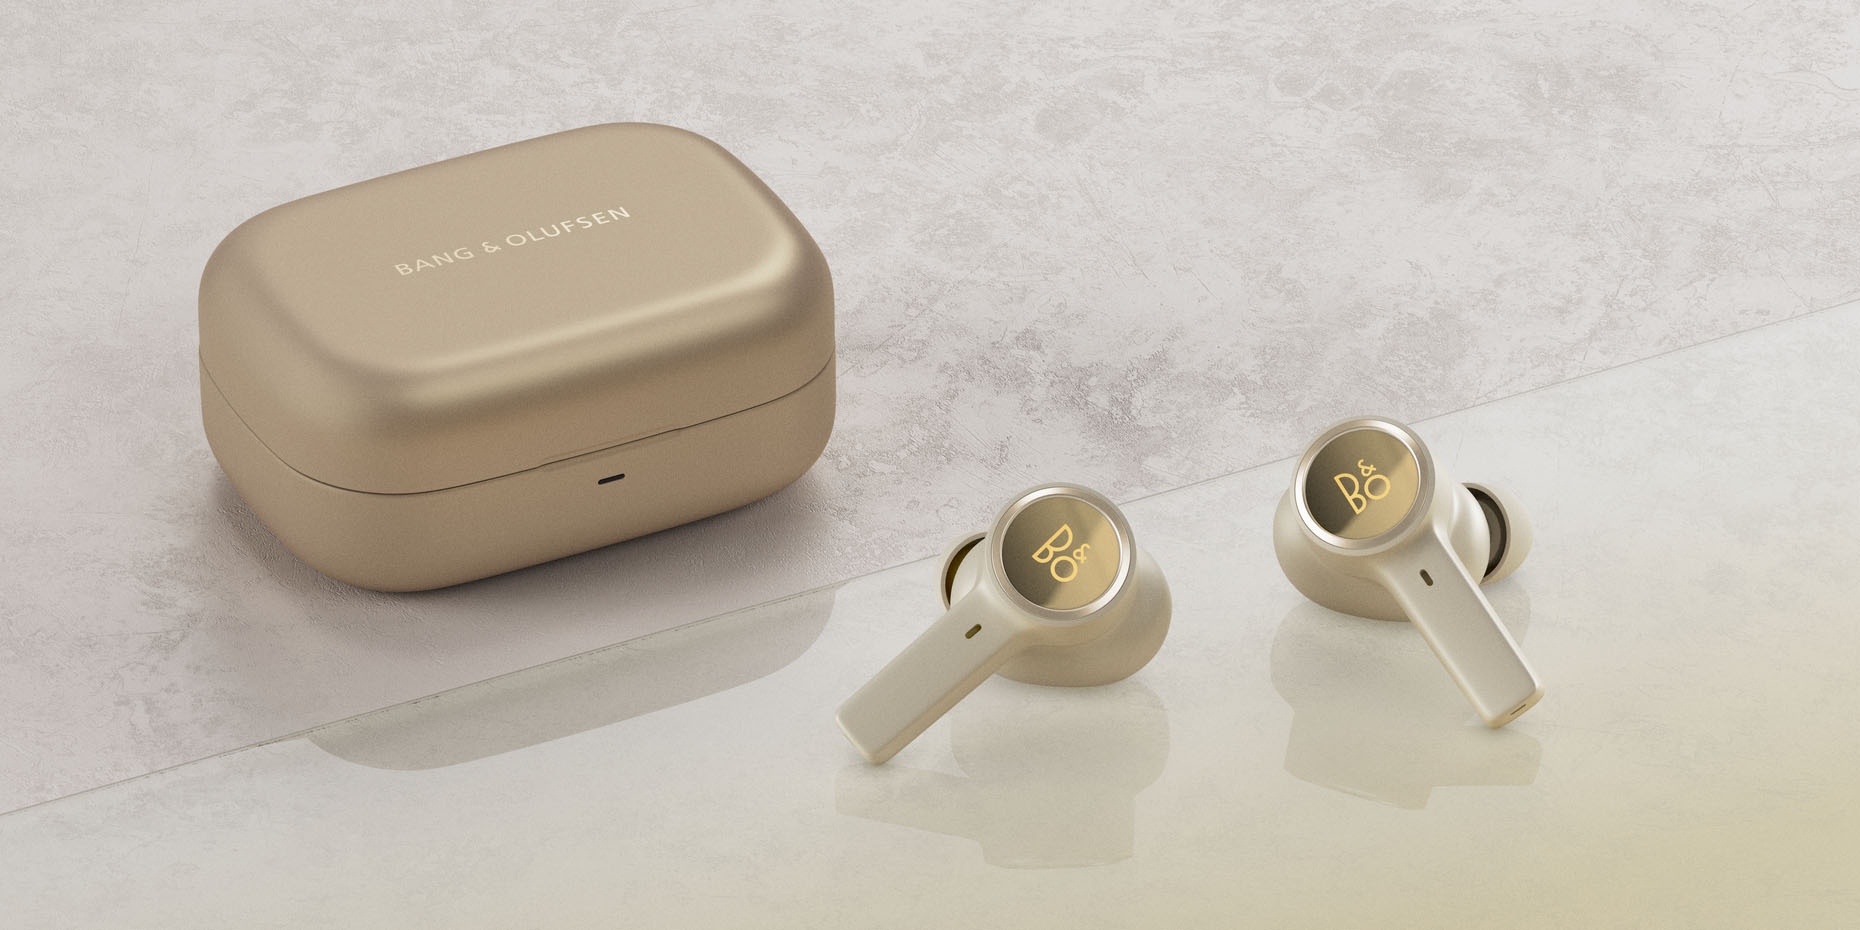 Louis Vuitton wants you to pay them $700 for putting their logo on in-ear  wireless headphones - 9to5Mac